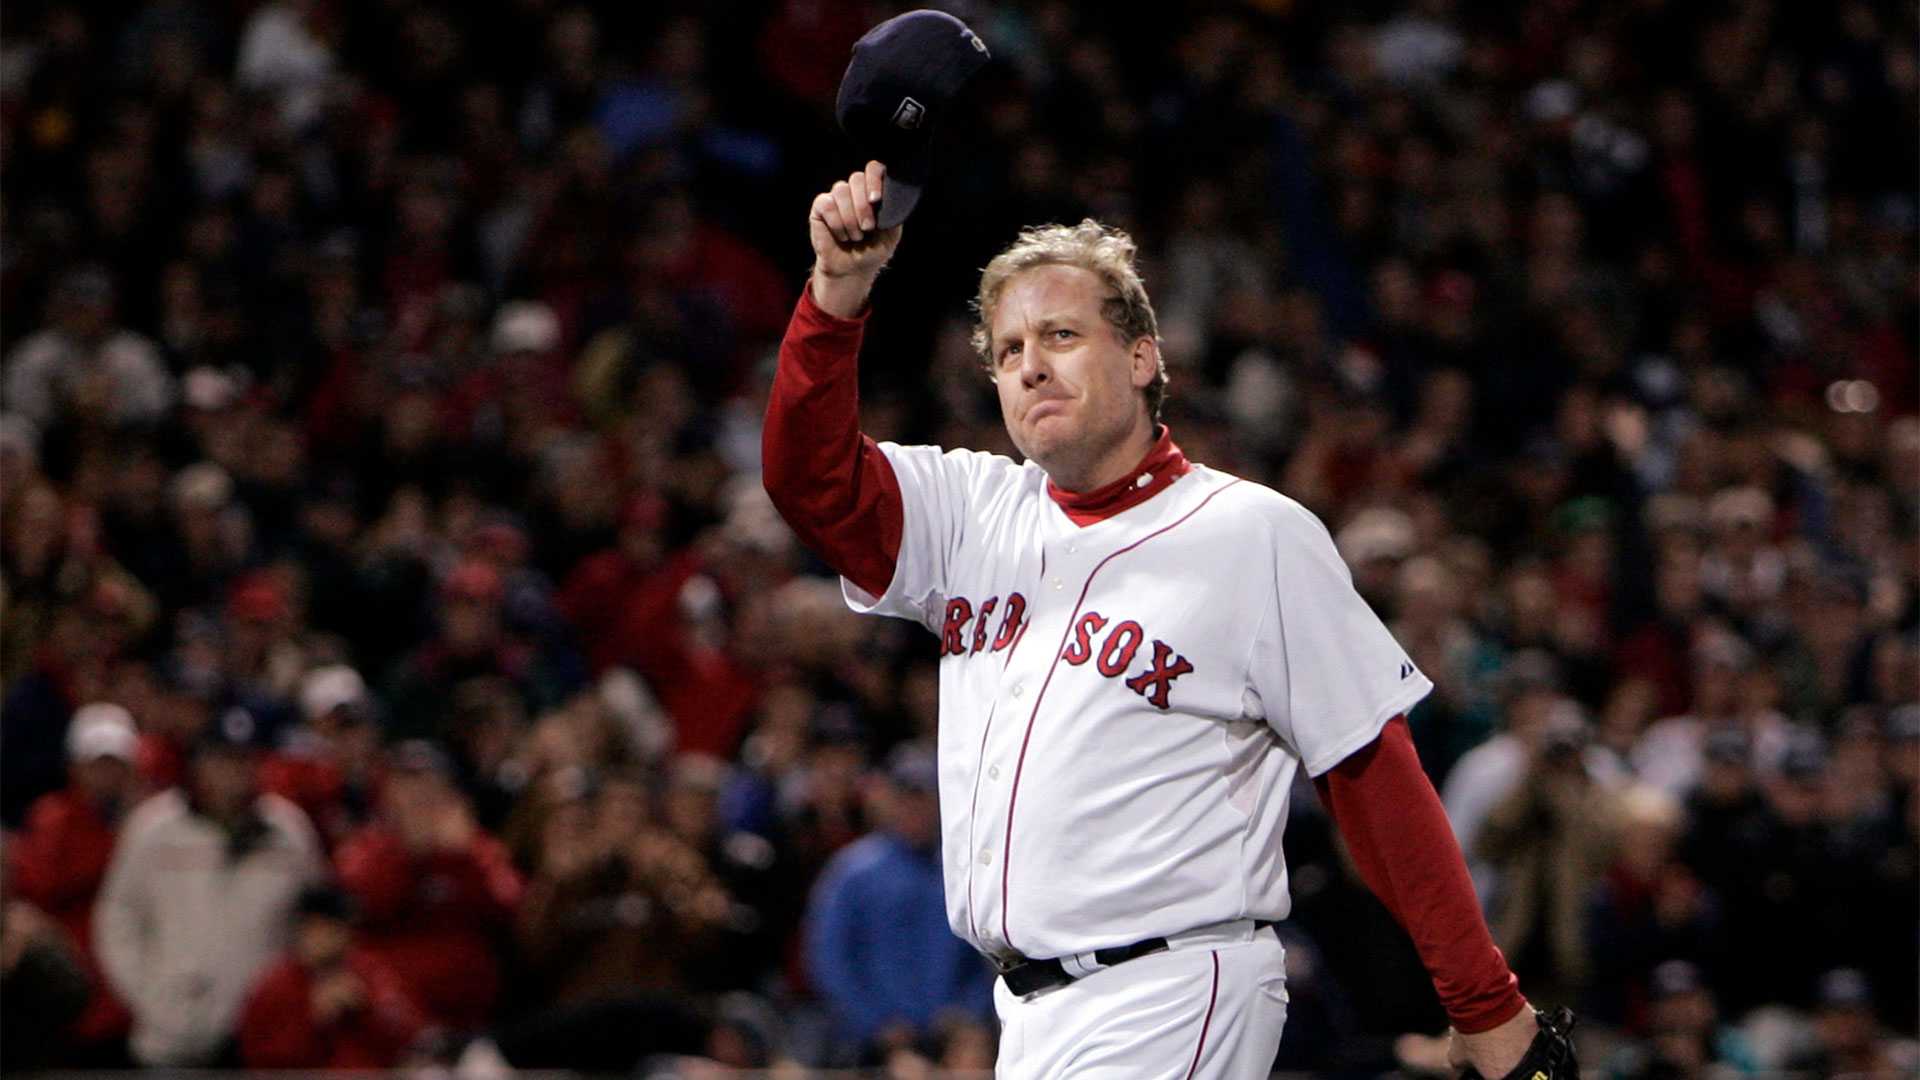 Curt Schilling asks to be taken off HOF ballot after missing cut again